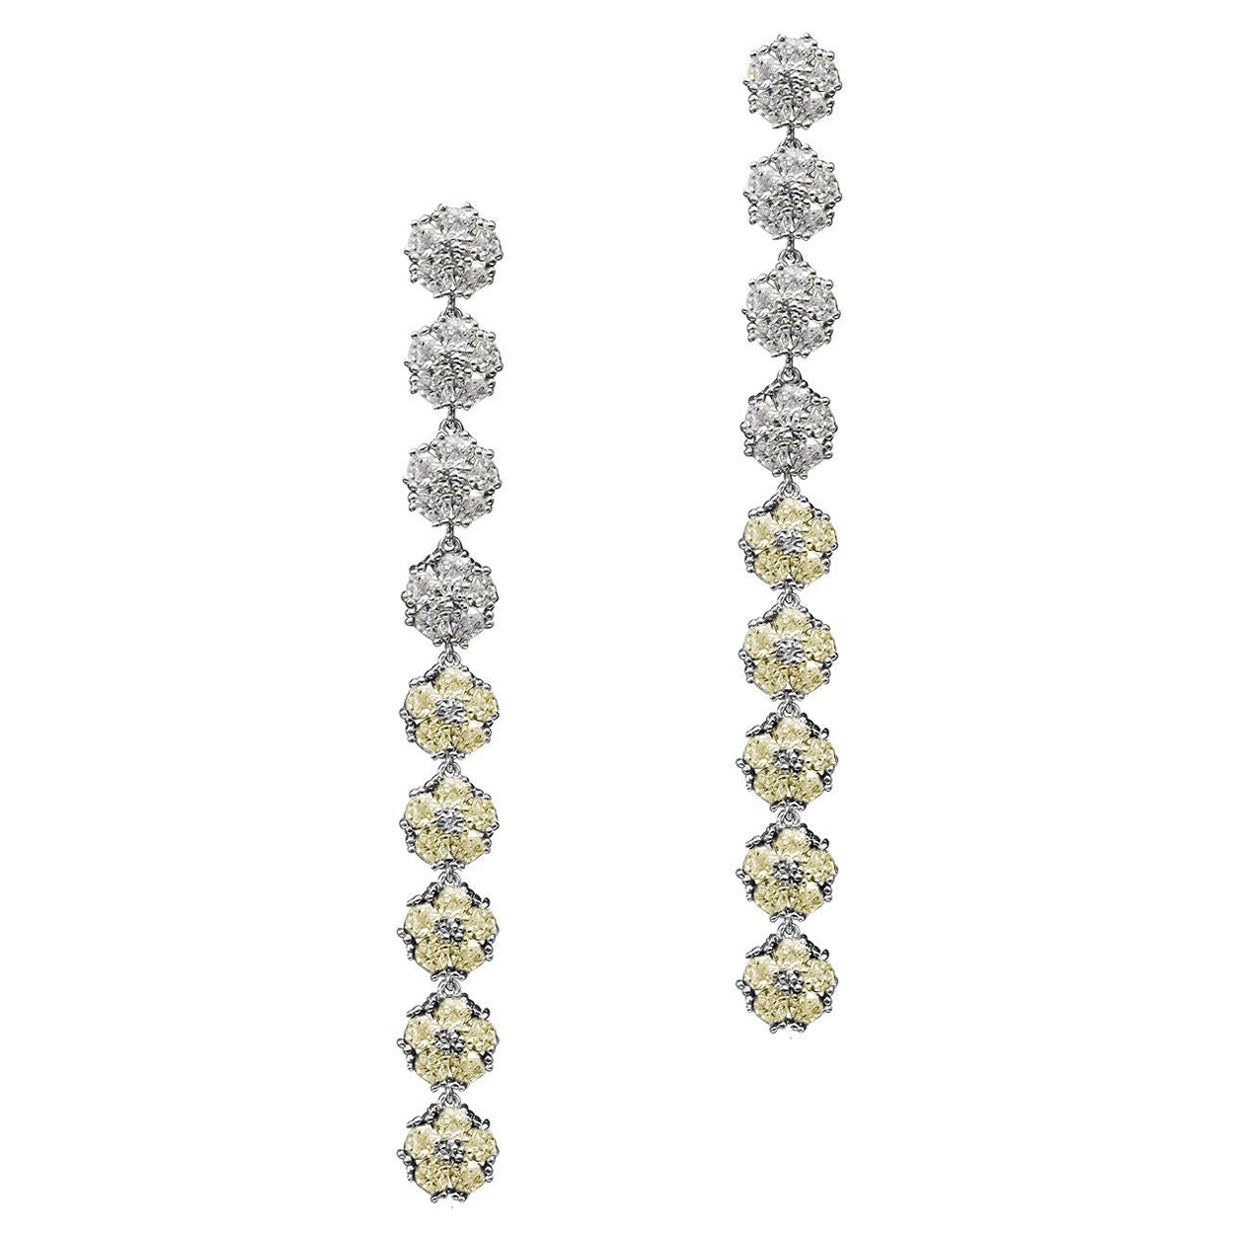 Blossom Gentile Ombre Chandelier Earrings, White and Yellow Gemstones For Sale